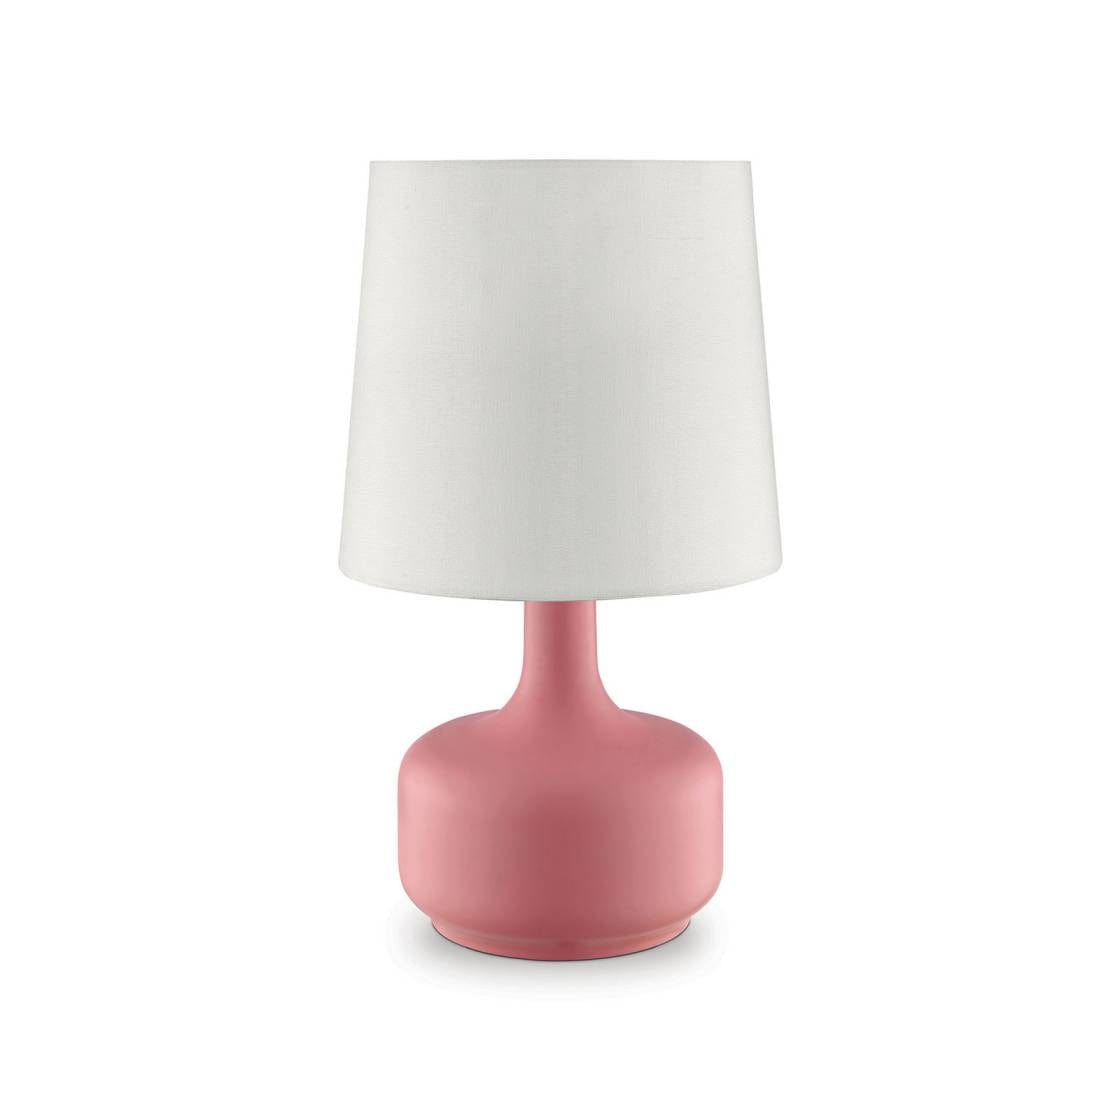 Benzara Contemporary Table Lamp With Pot Belly Base With Matte Pink Finish, Pink By Benzara Table Lamps BM209050